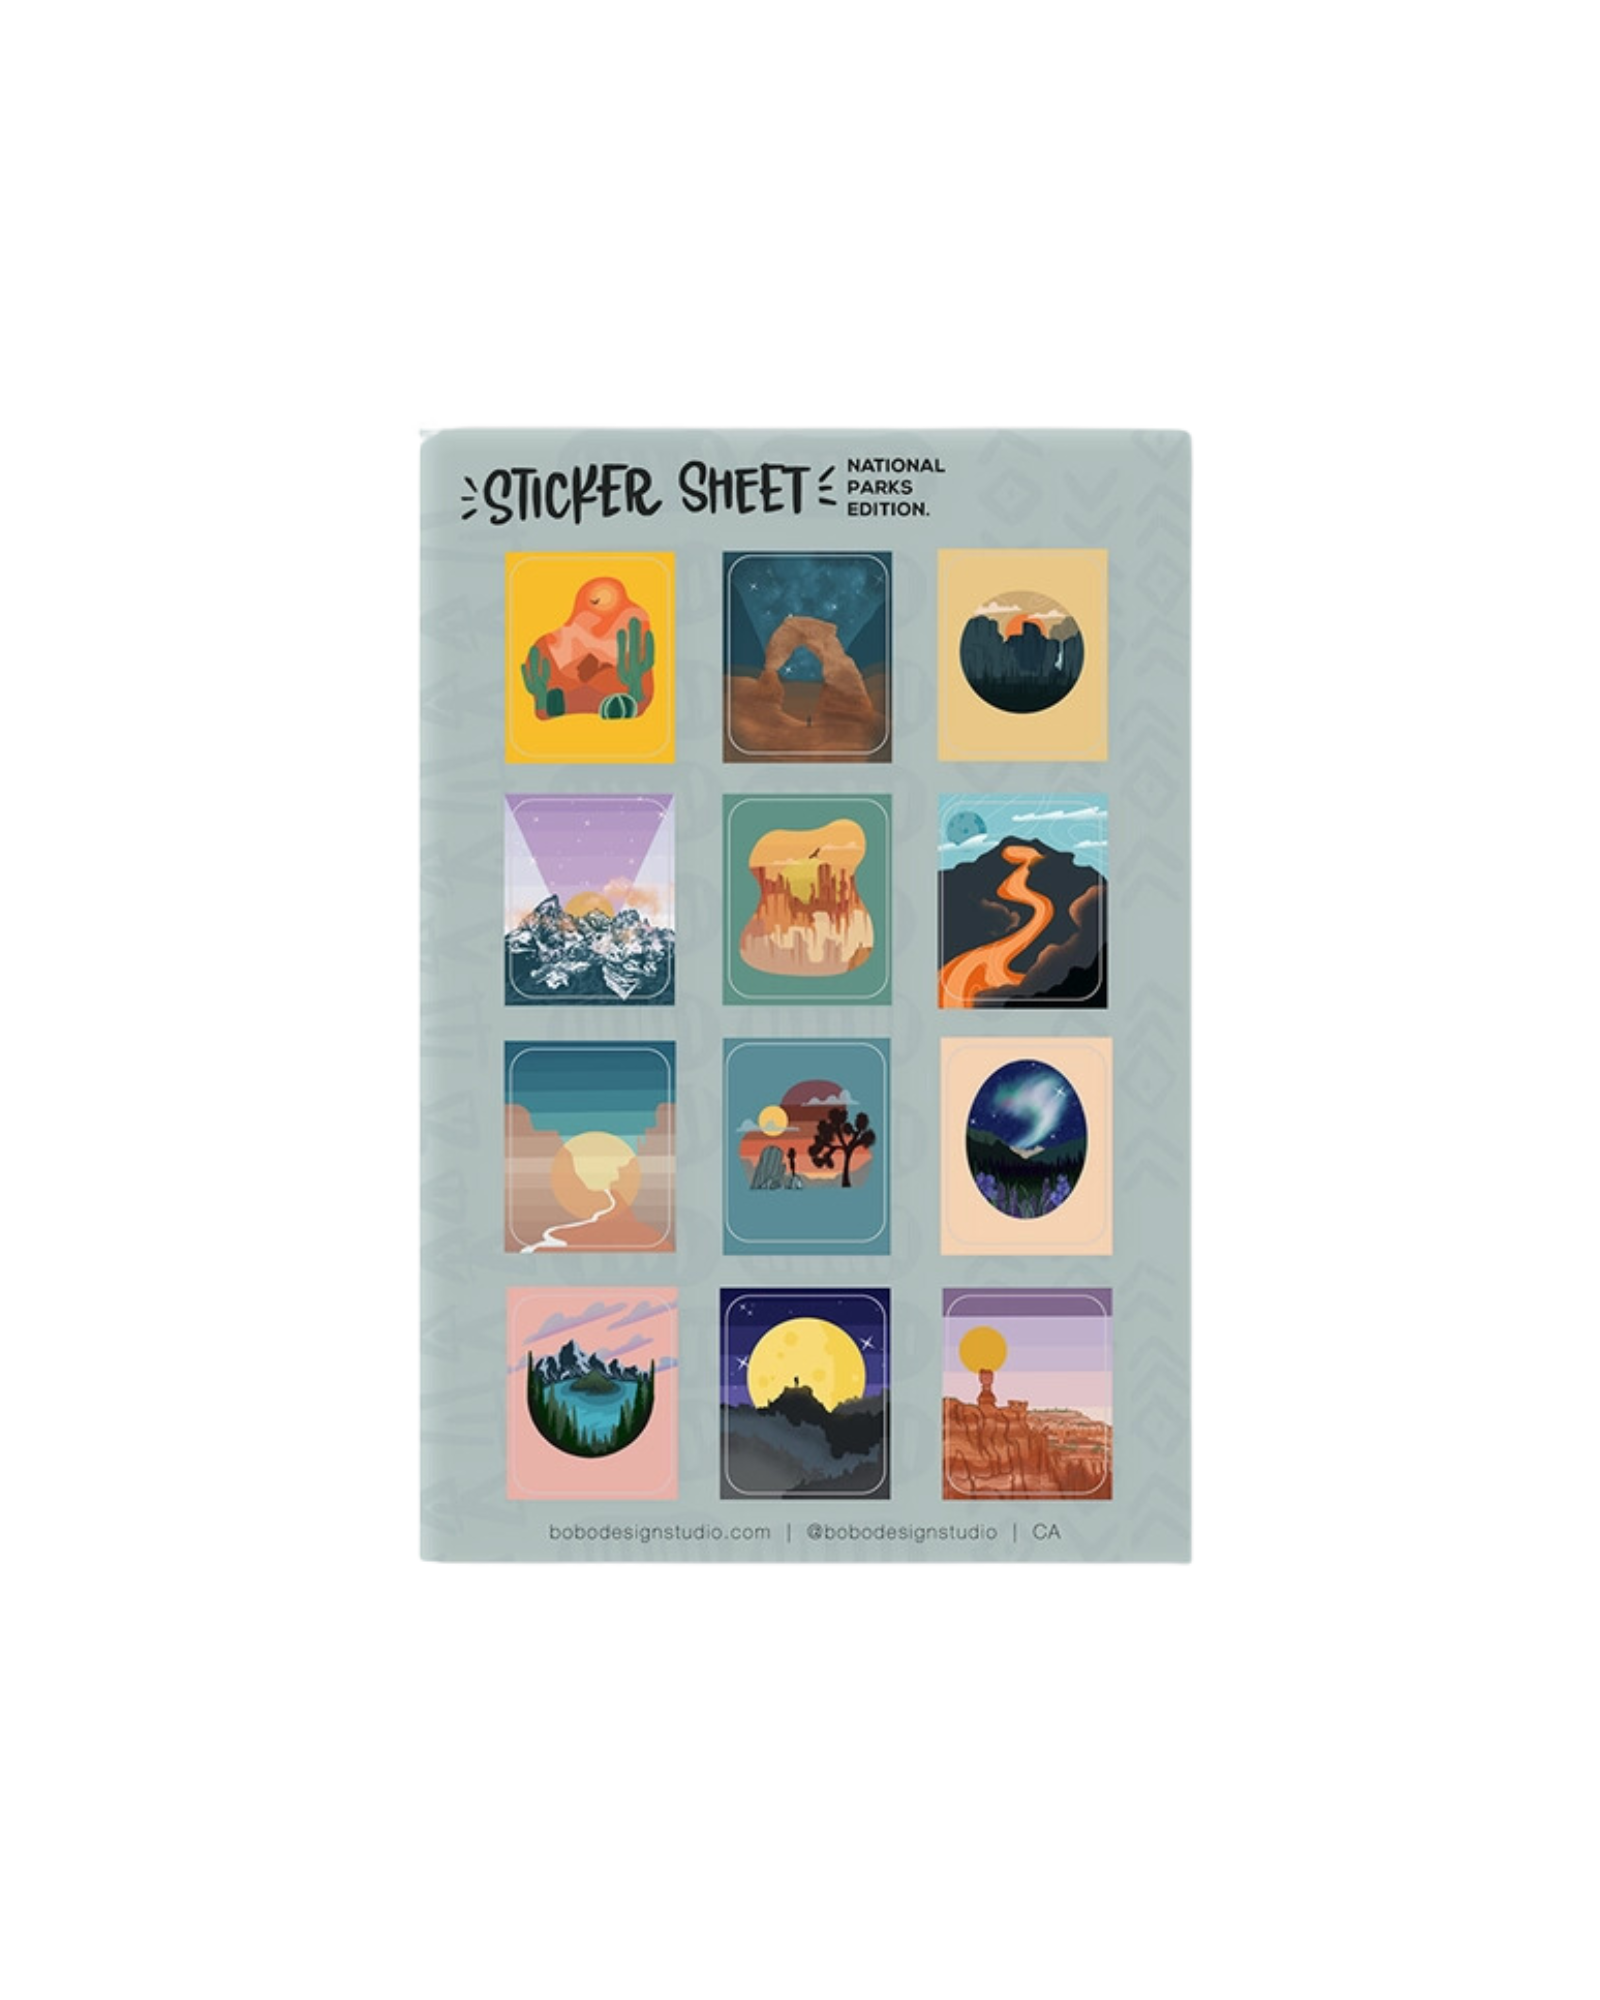 Sticker sheet with 12 illustrated national park stickers